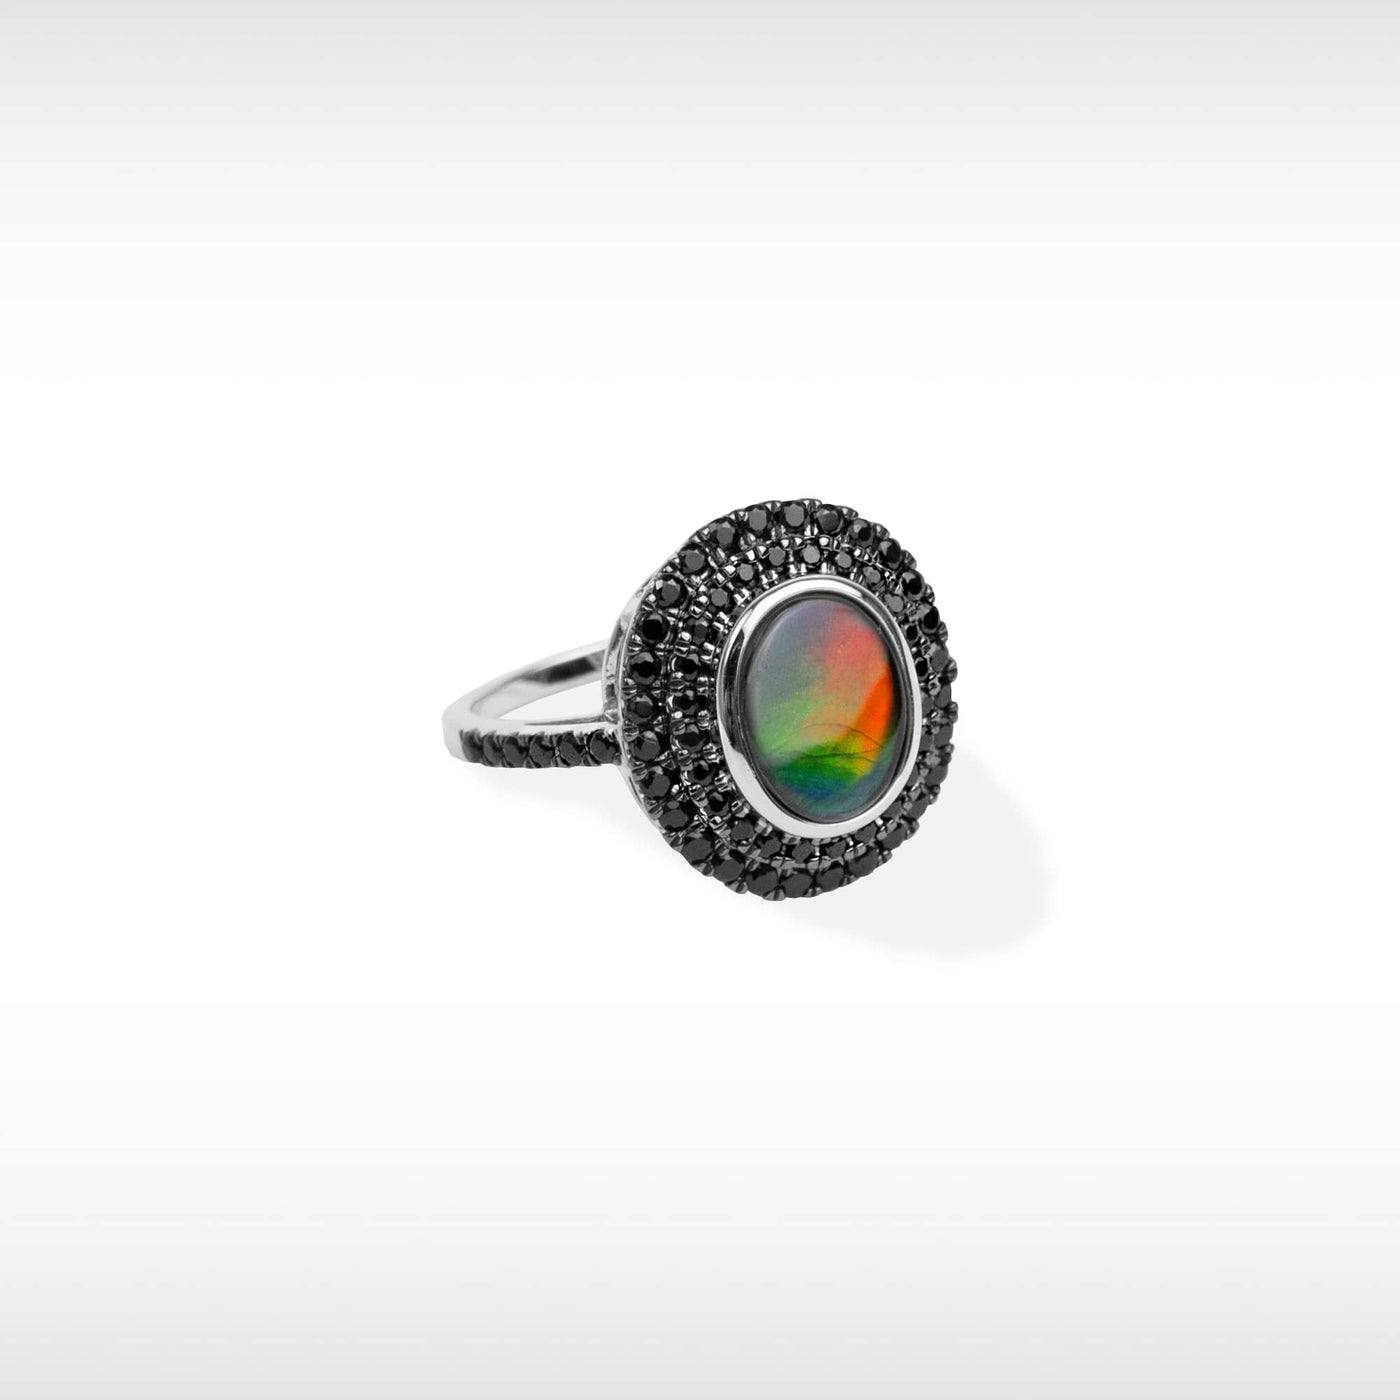 Women's Sterling Silver Ammolite Ring with Black Spinel Accent